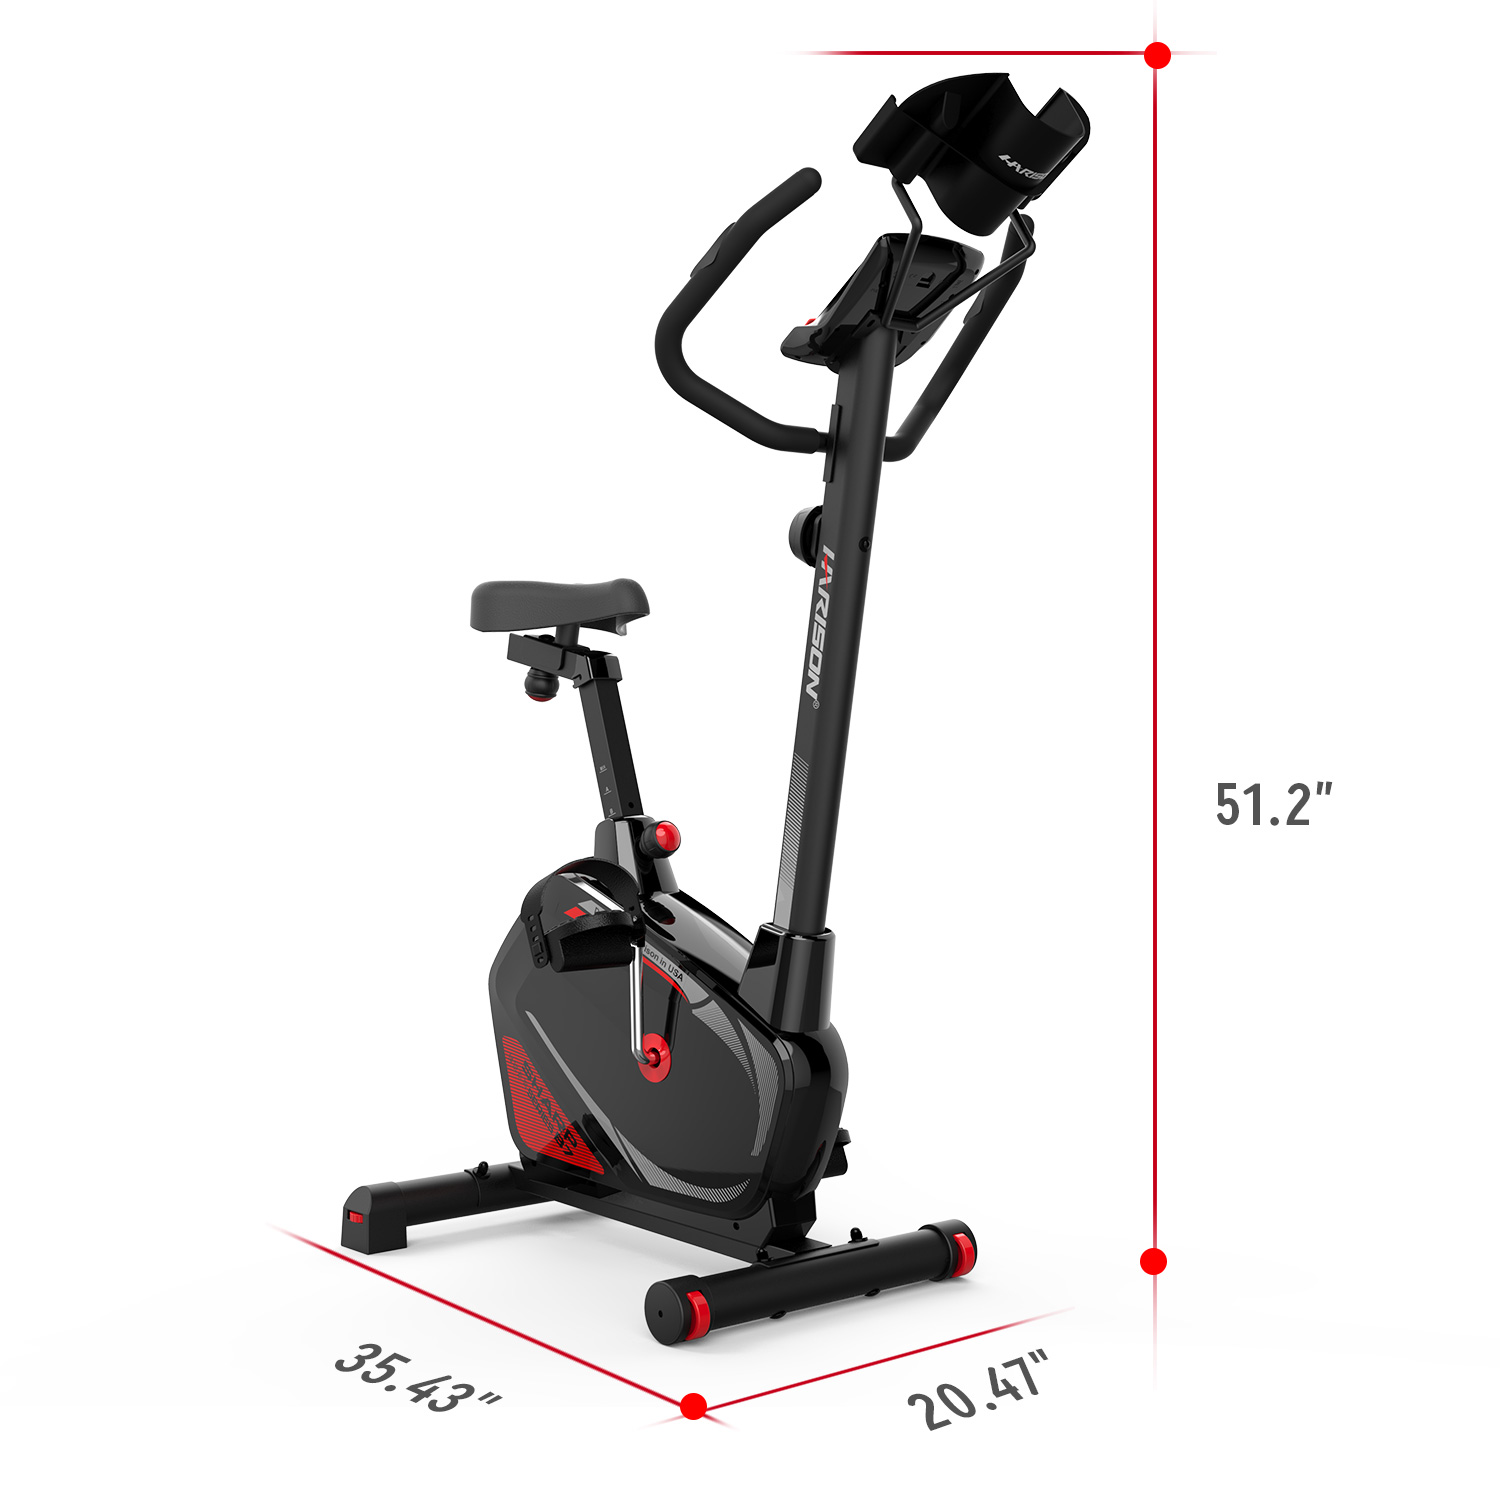 HARISON bike exercise bike cardio strength Exercise gym Equipment for home Workout